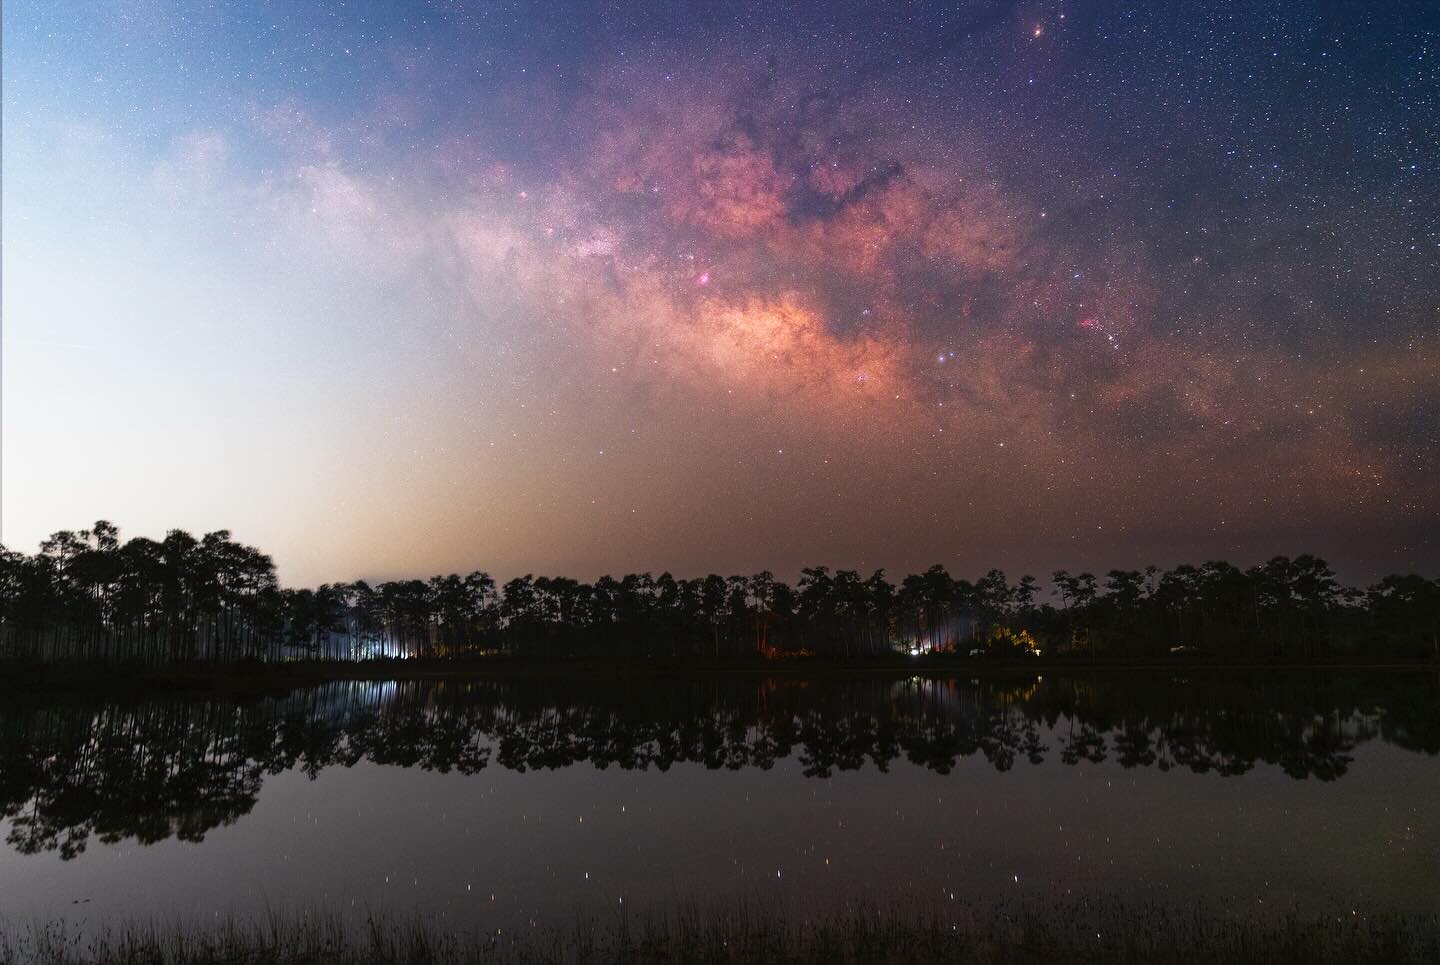 What a great night we had during my Everglades Milky Way Madness workshop! We photographed the Milky Way over several landscapes in Everglades National Park. We heard owls, gators, and many other birds. It&rsquo;s always a fun night when you&rsquo;re